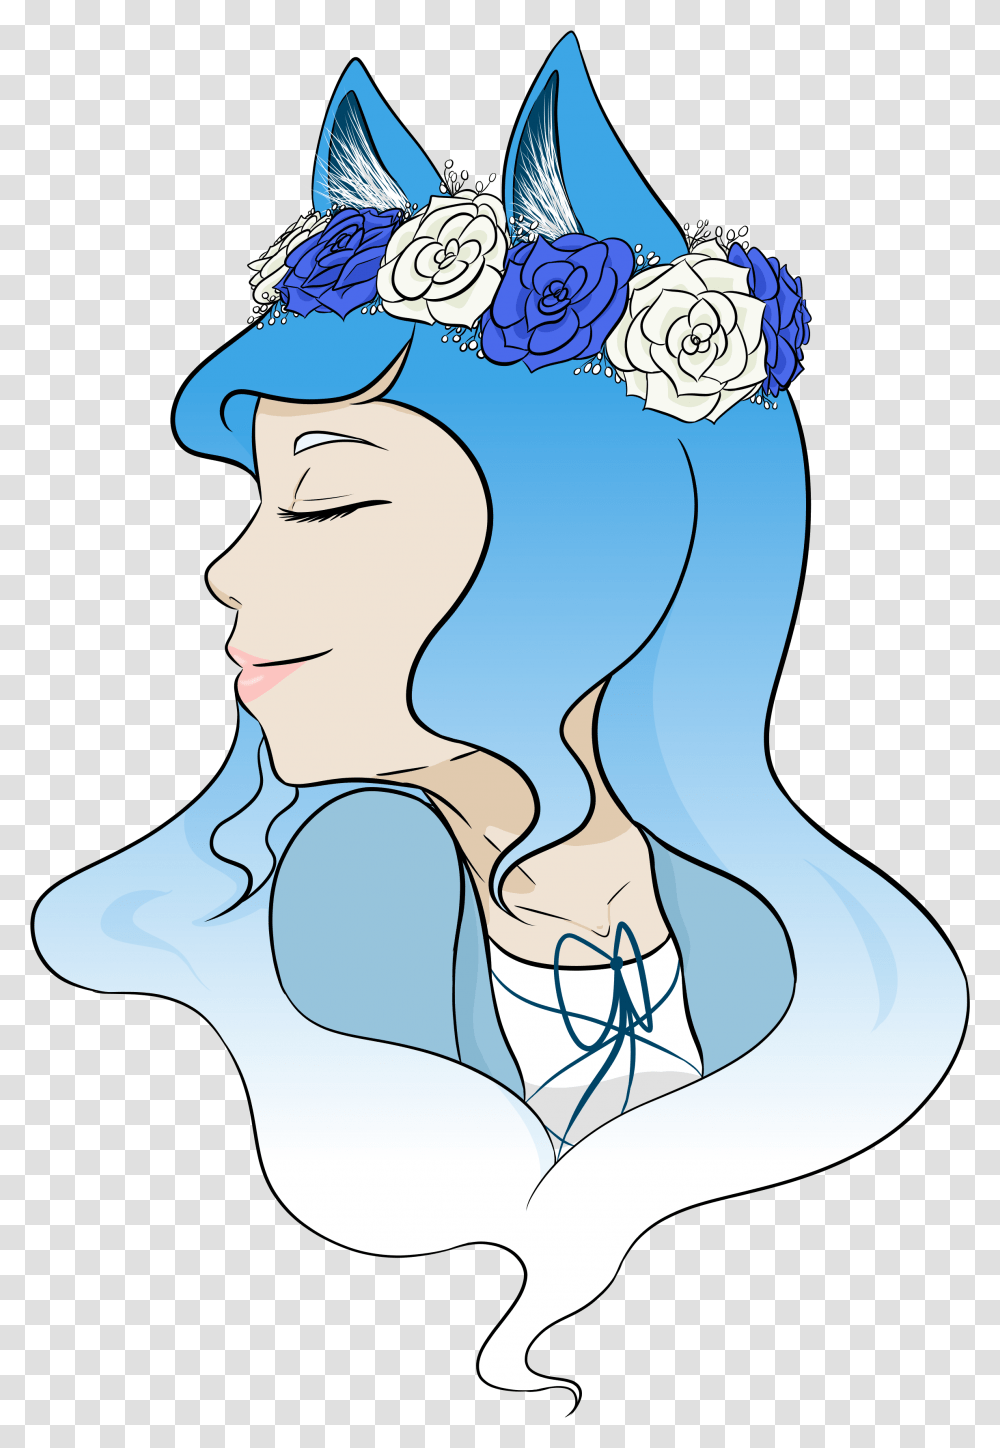 Download Hd Diana Flower Crown Cartoon Cartoon, Clothing, Graphics, Drawing, Outdoors Transparent Png